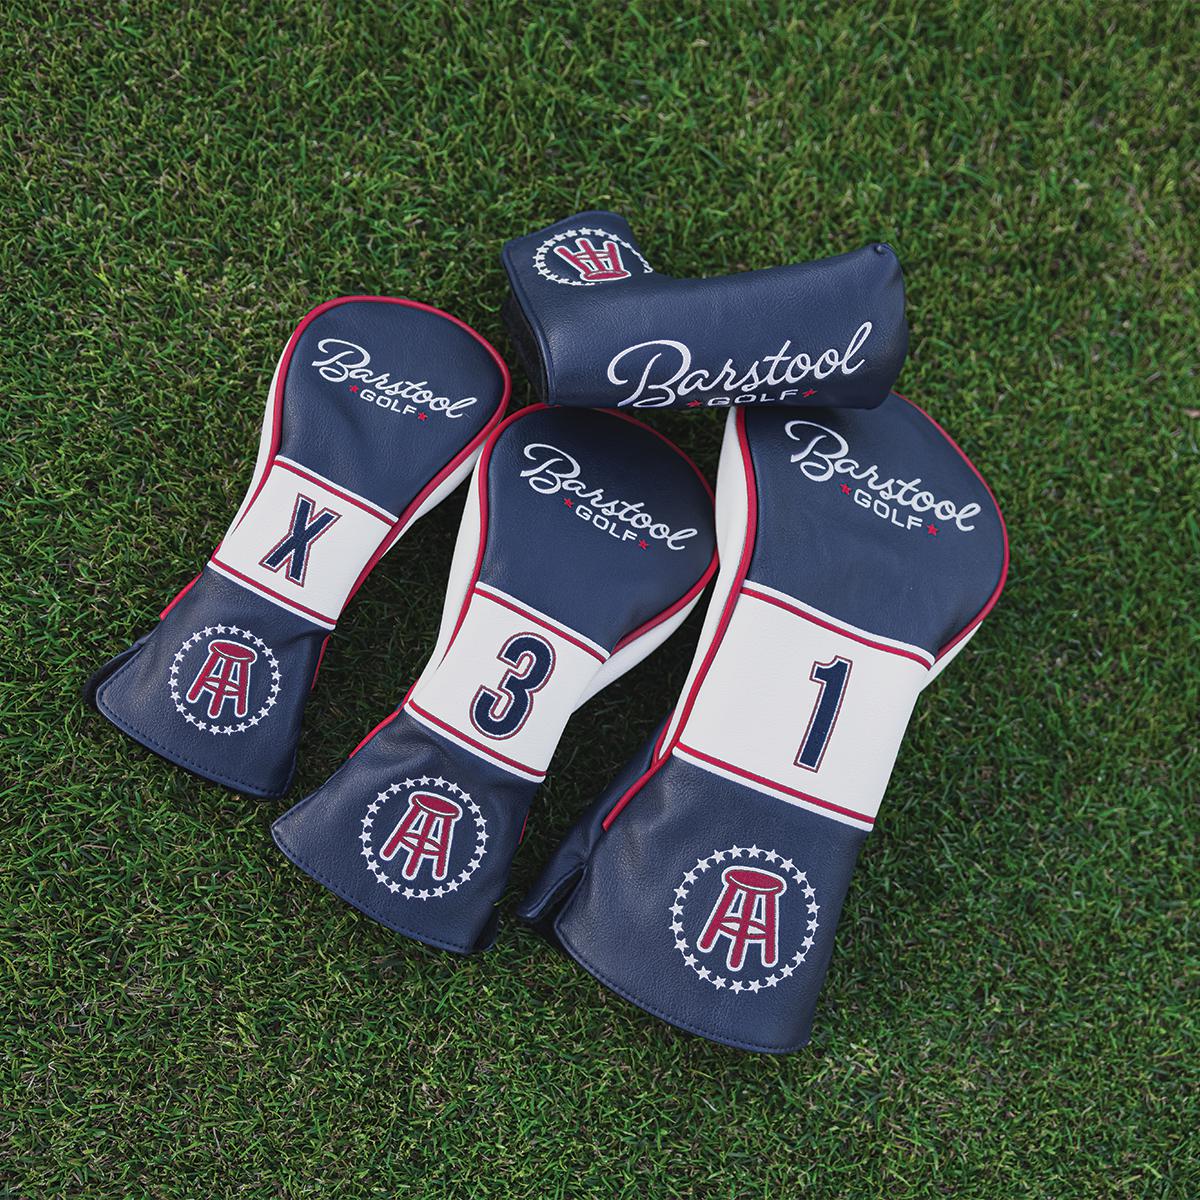 Barstool Golf Hybrid Headcover-Golf Accessories-Fore Play-Navy-One Size-Barstool Sports